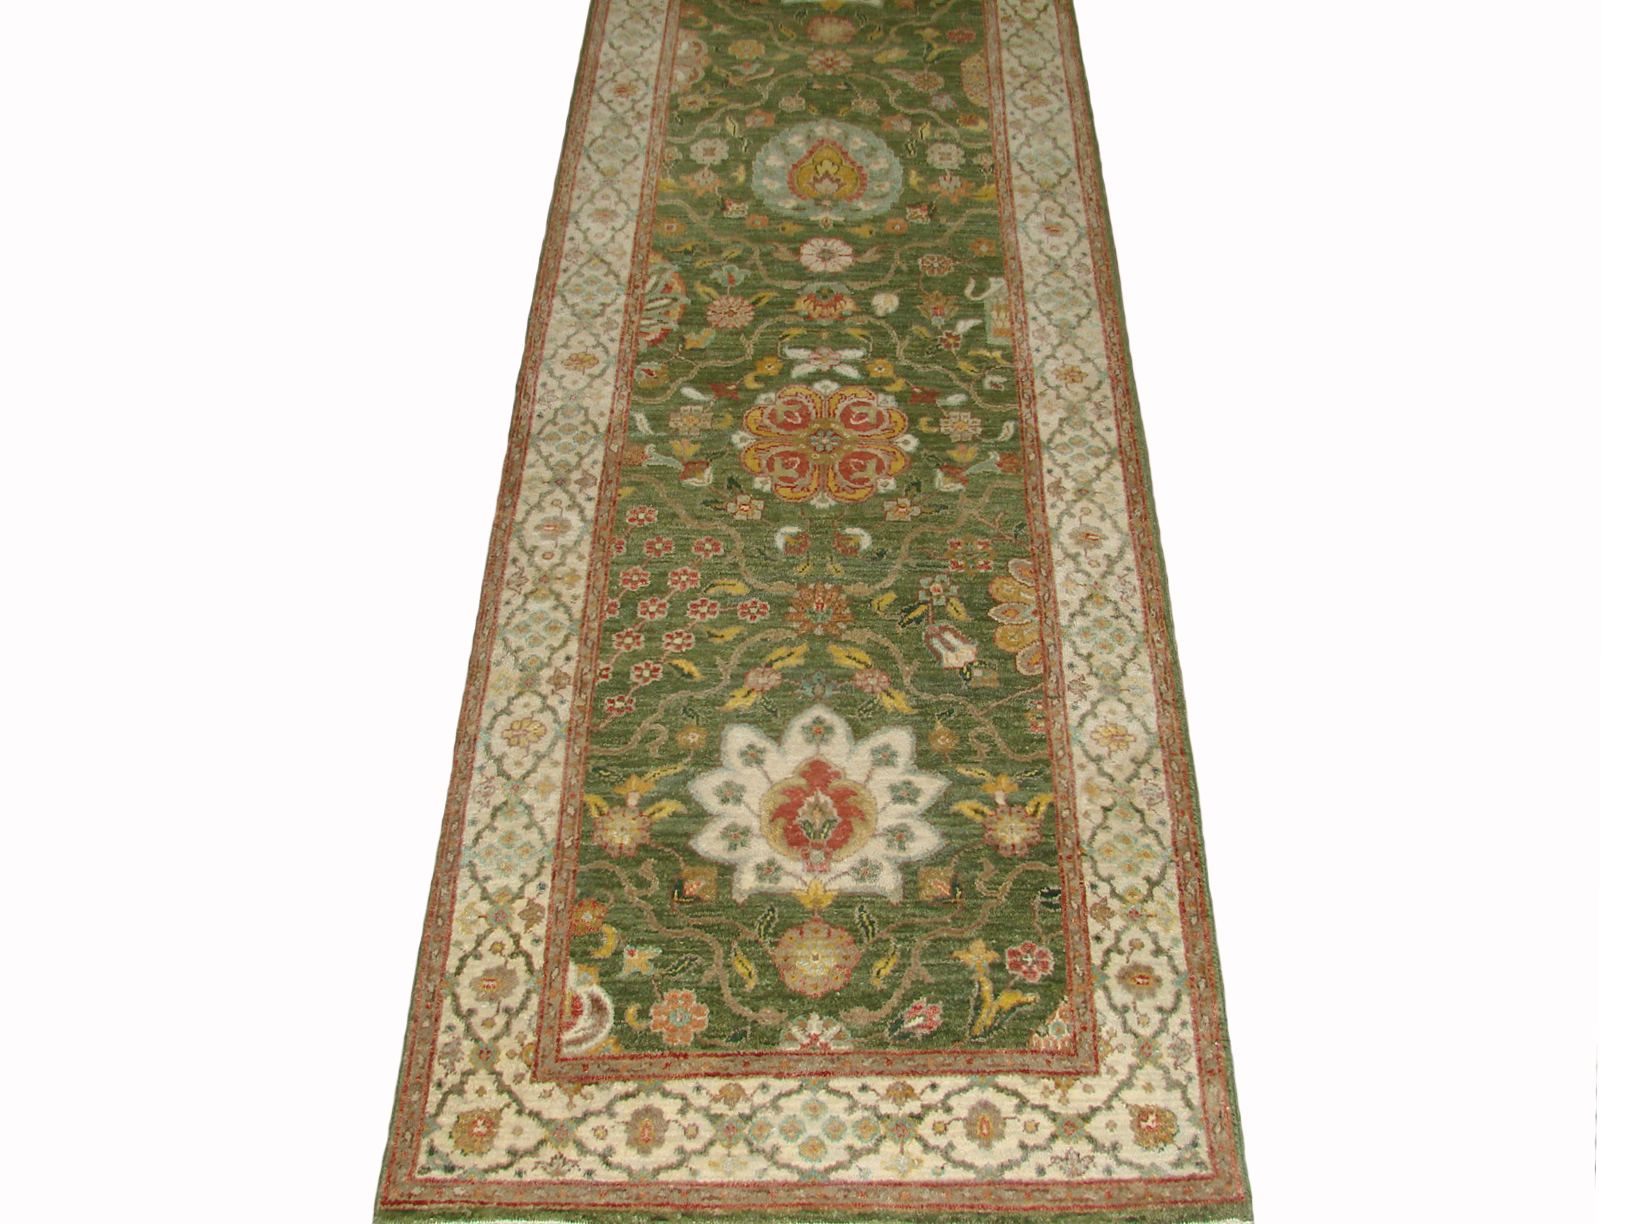 10 Runner Traditional Hand Knotted Wool Area Rug - MR20290